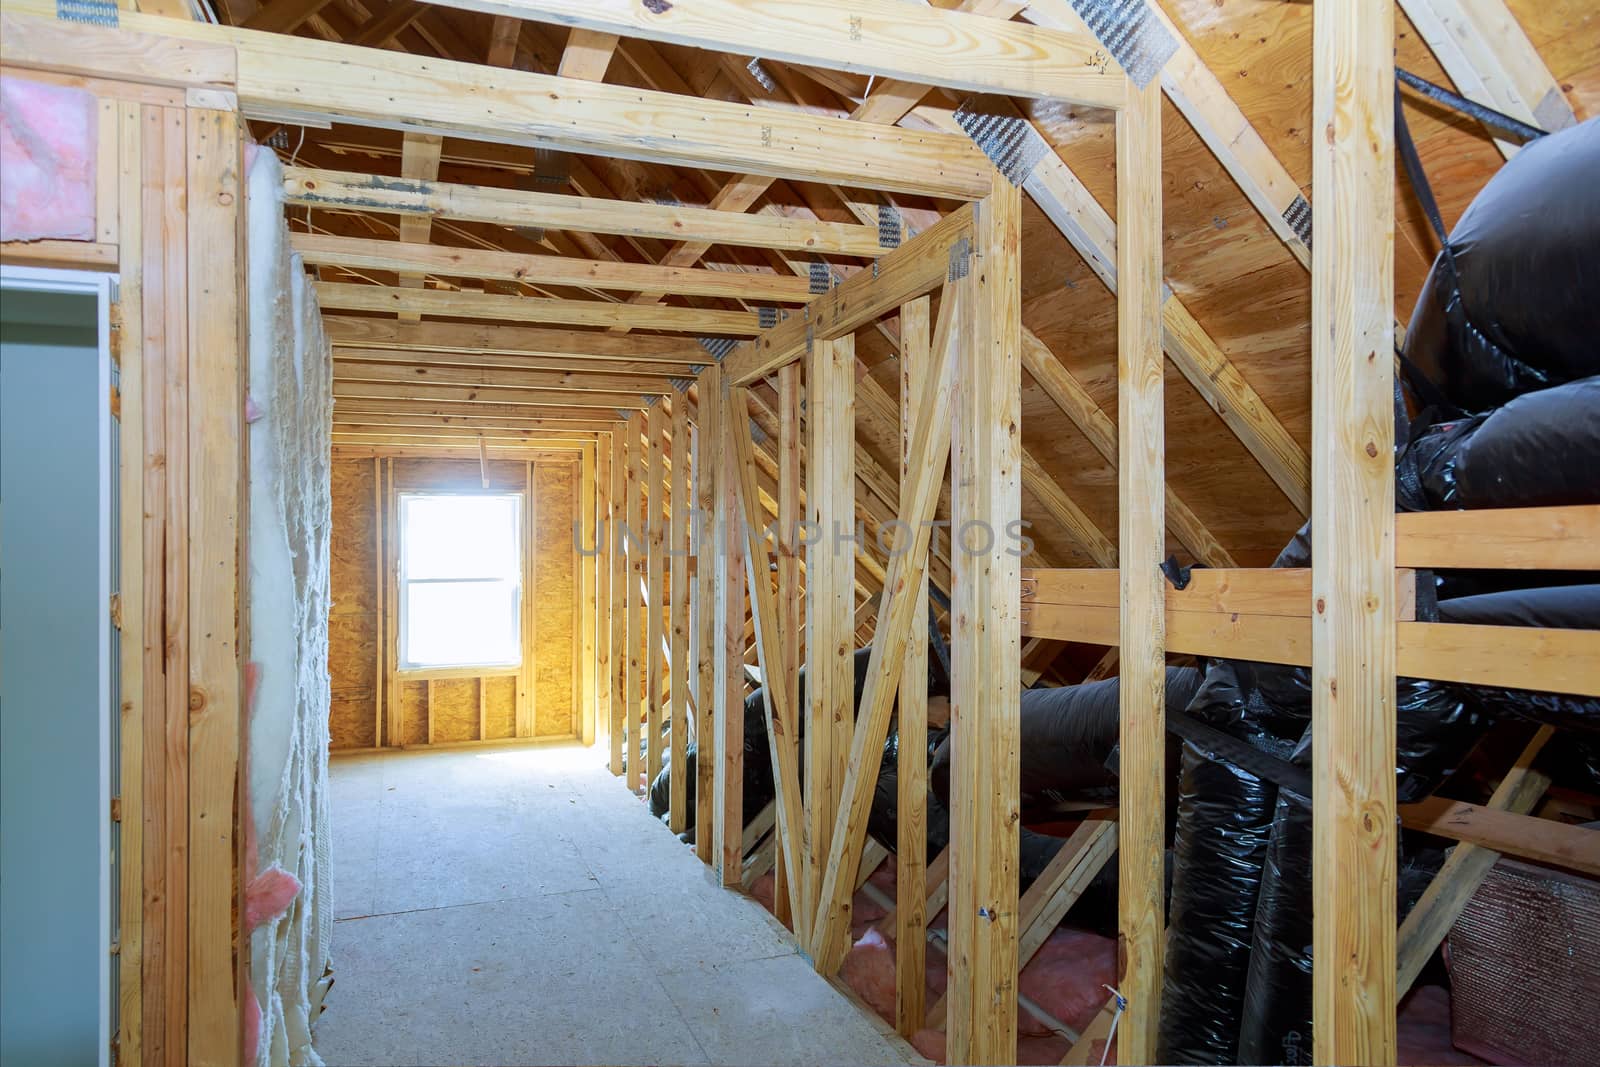 Thermal insulation in process of attic construction frame house a newly constructed home